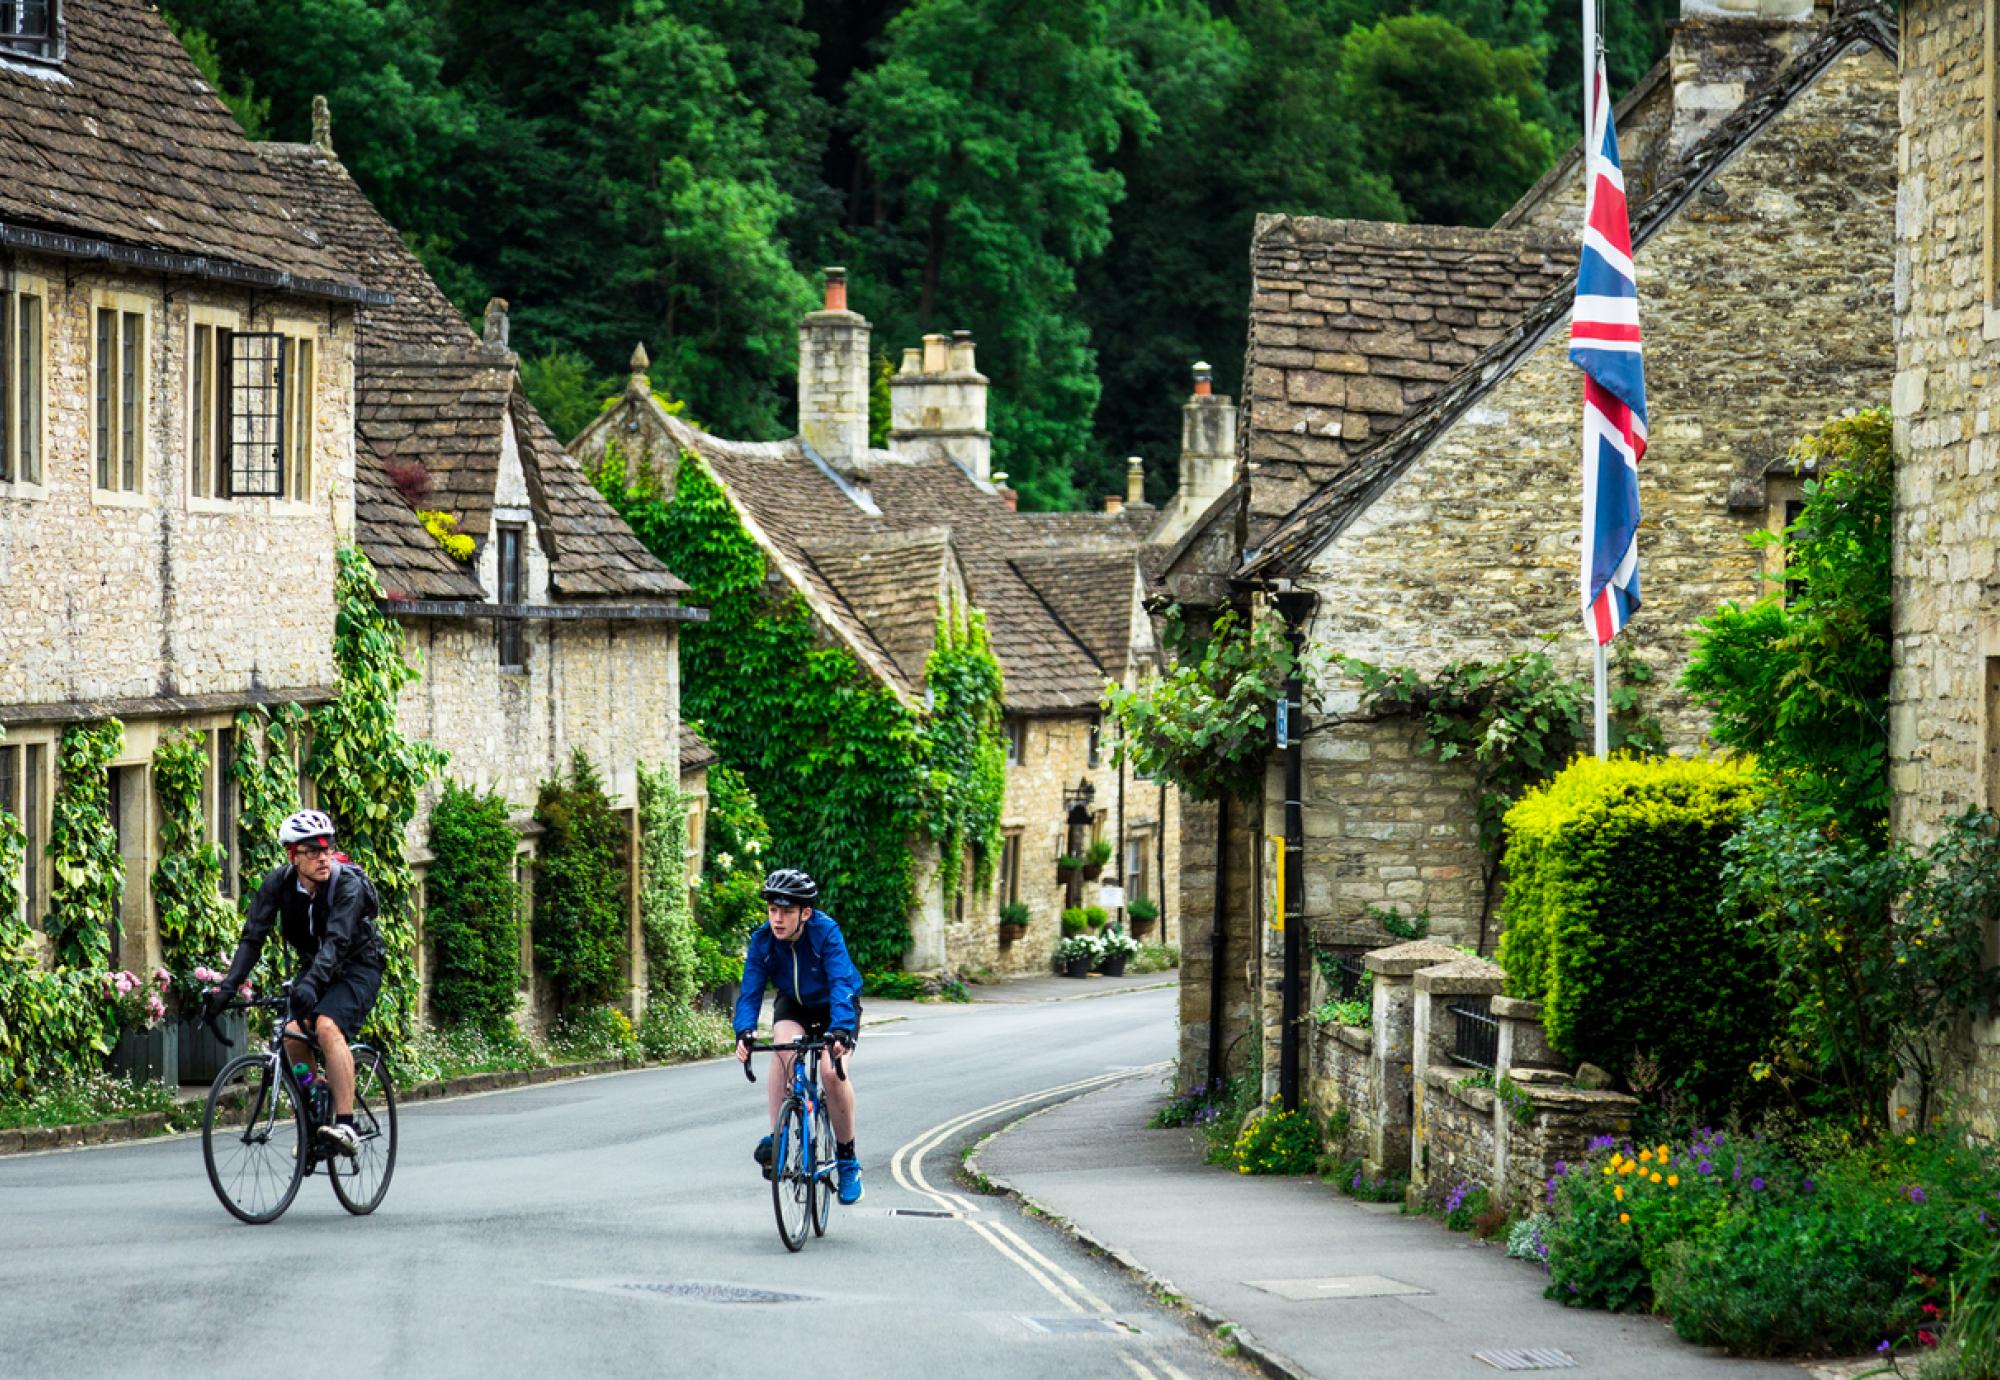 Cyclists riding bikes through a village in Cotswolds